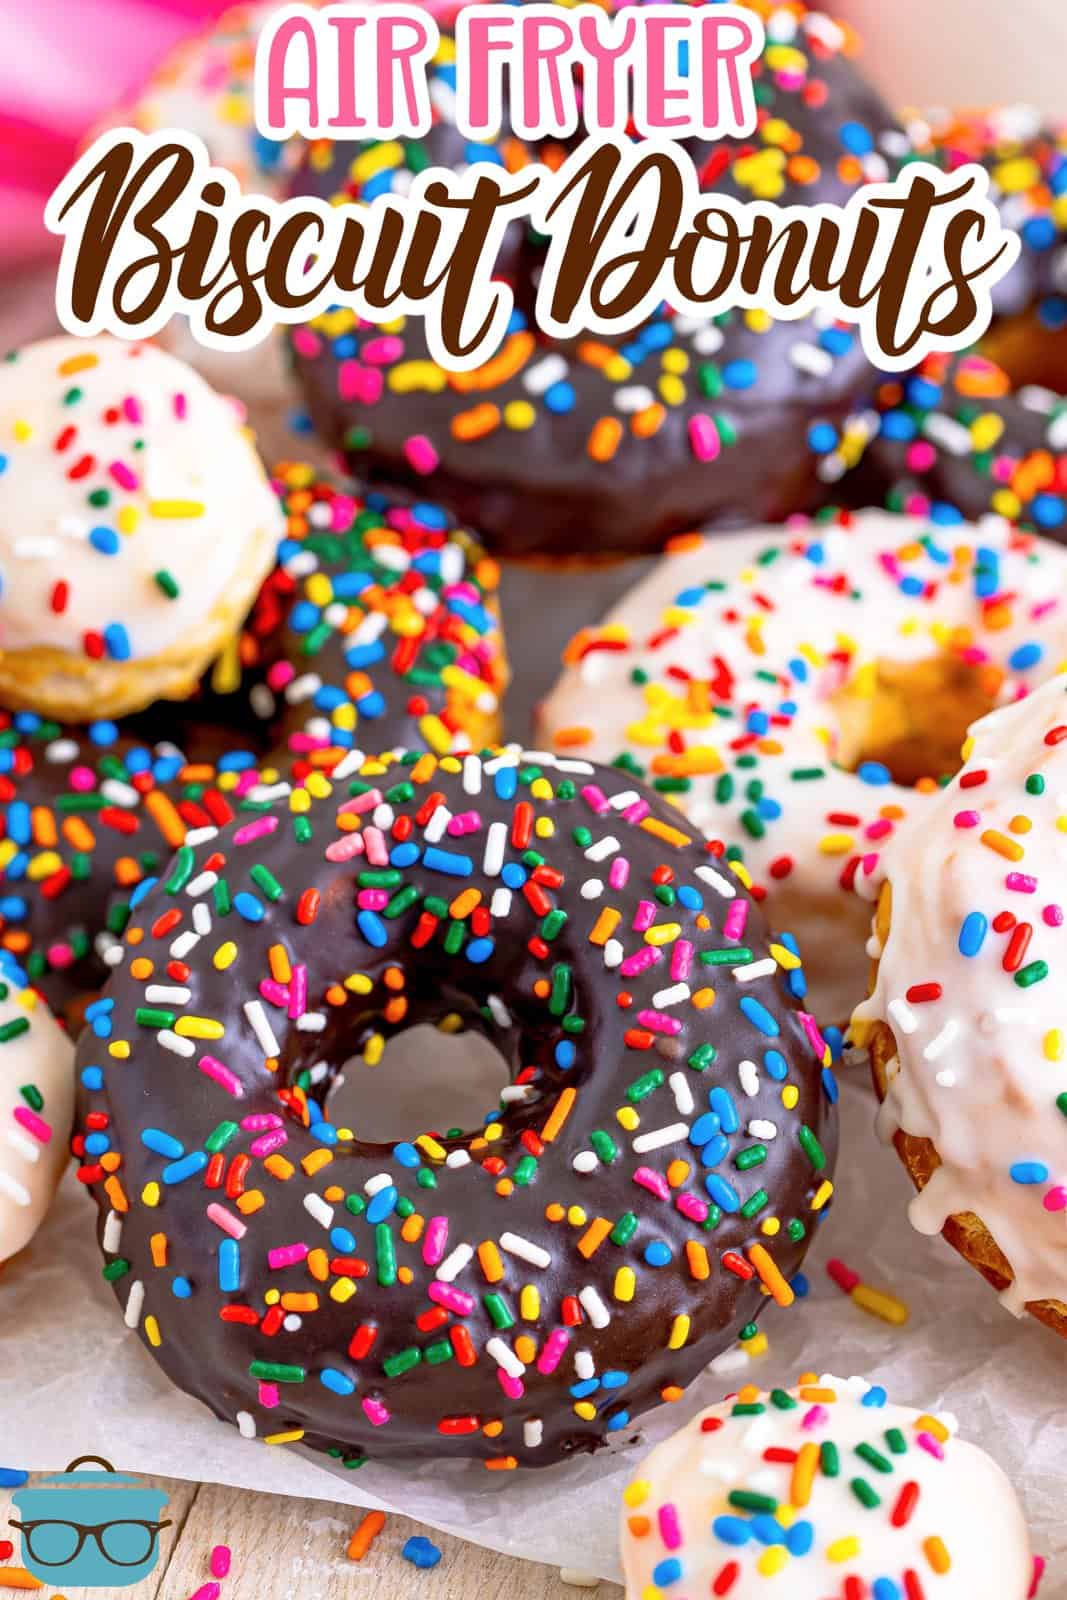 A few homemade donuts with frosting and sprinkles.